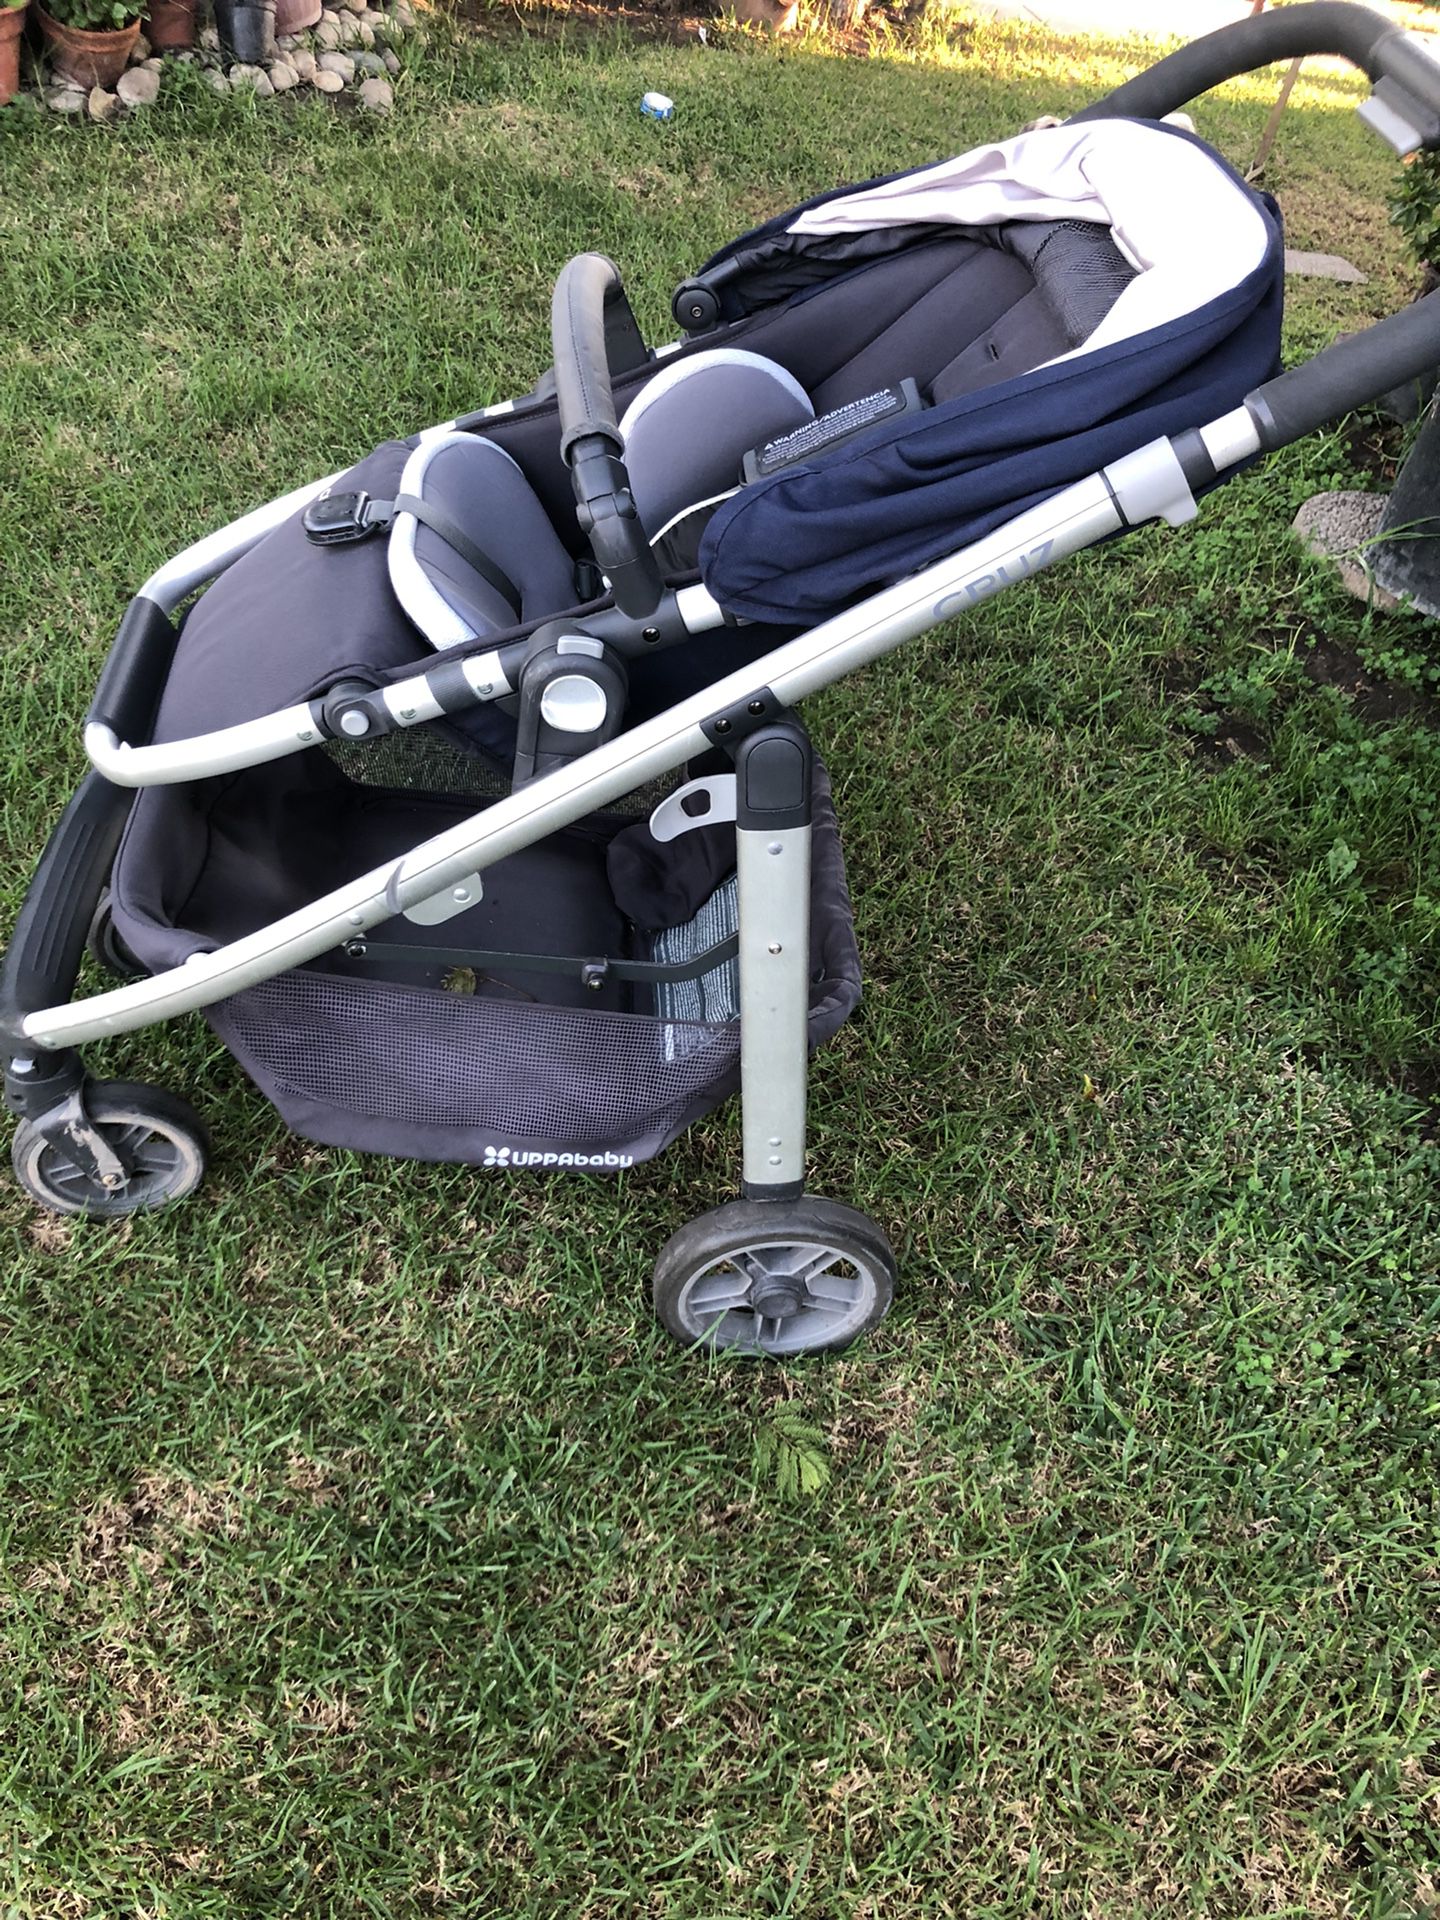 Stroller With Car seat 